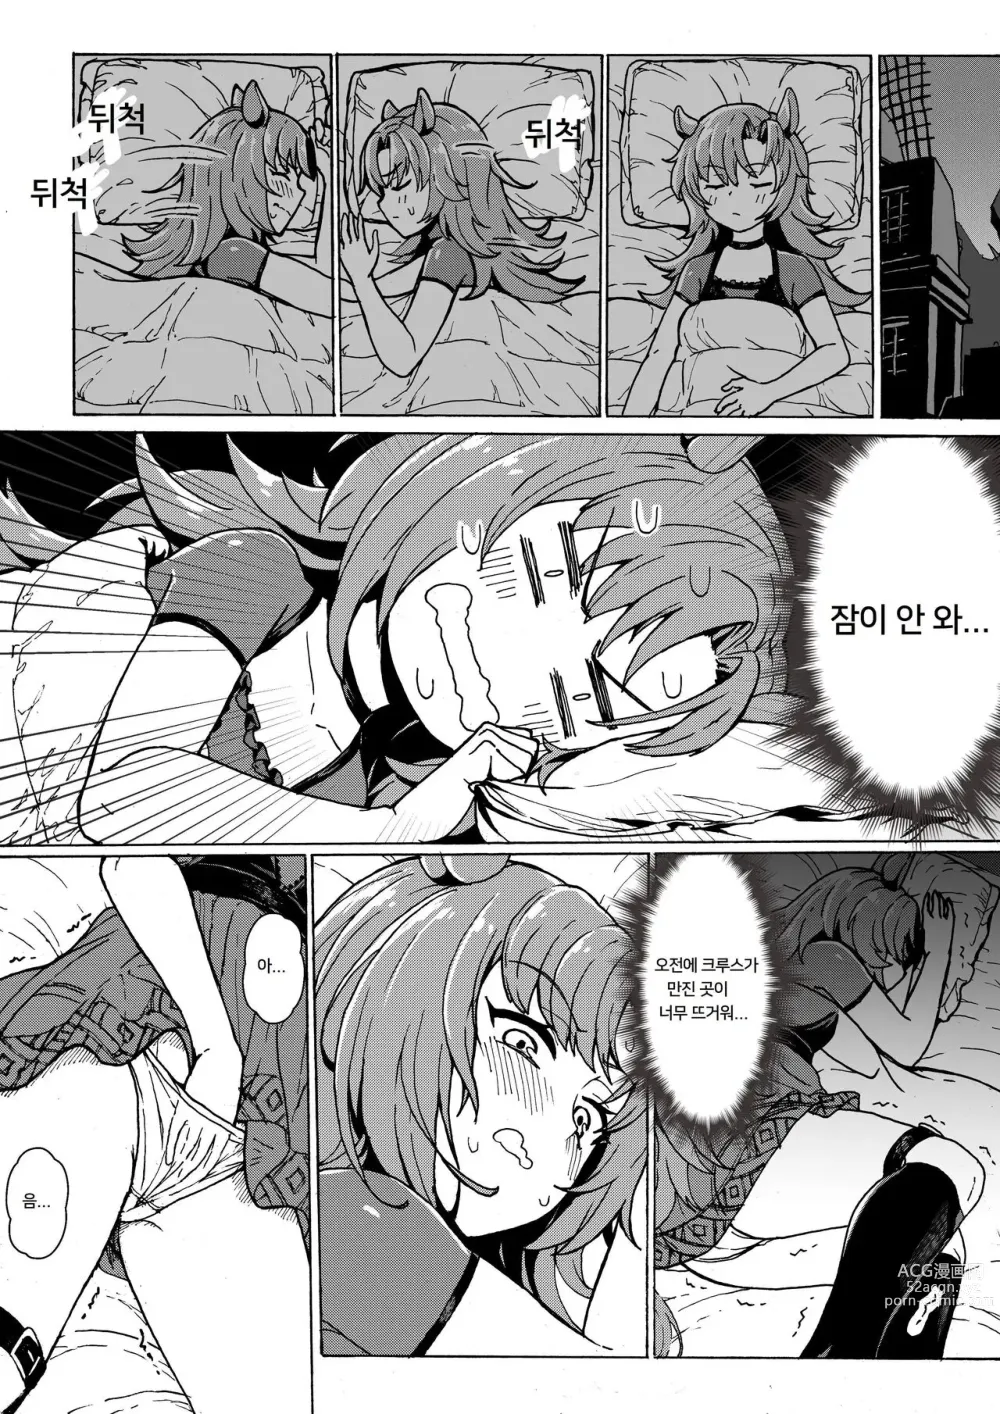 Page 4 of doujinshi 팽 x 크루스